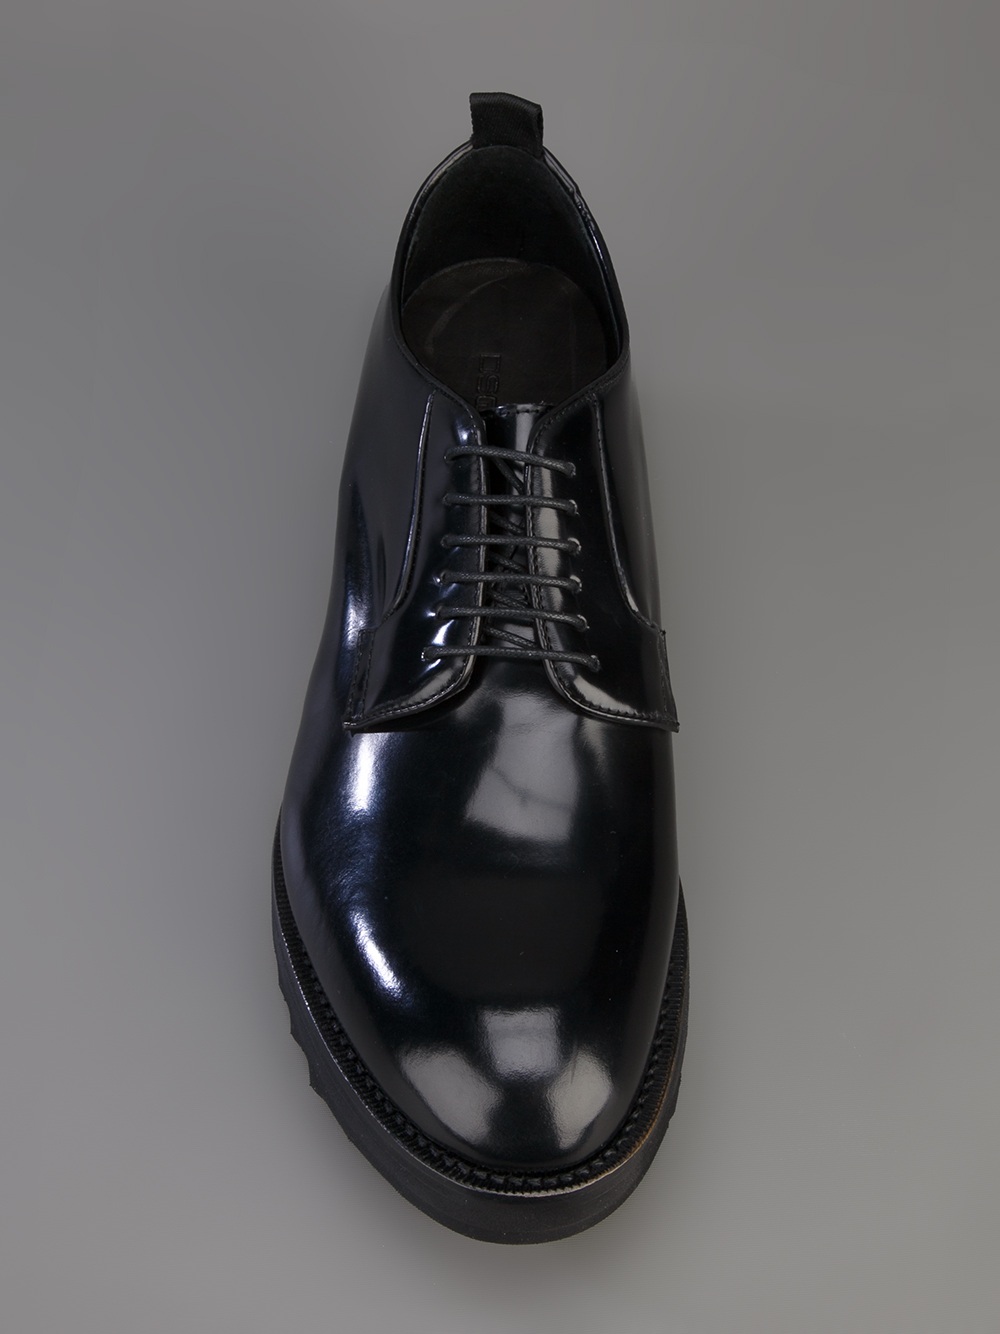 DSquared² Corrugated Sole Derby Shoe in Black for Men - Lyst